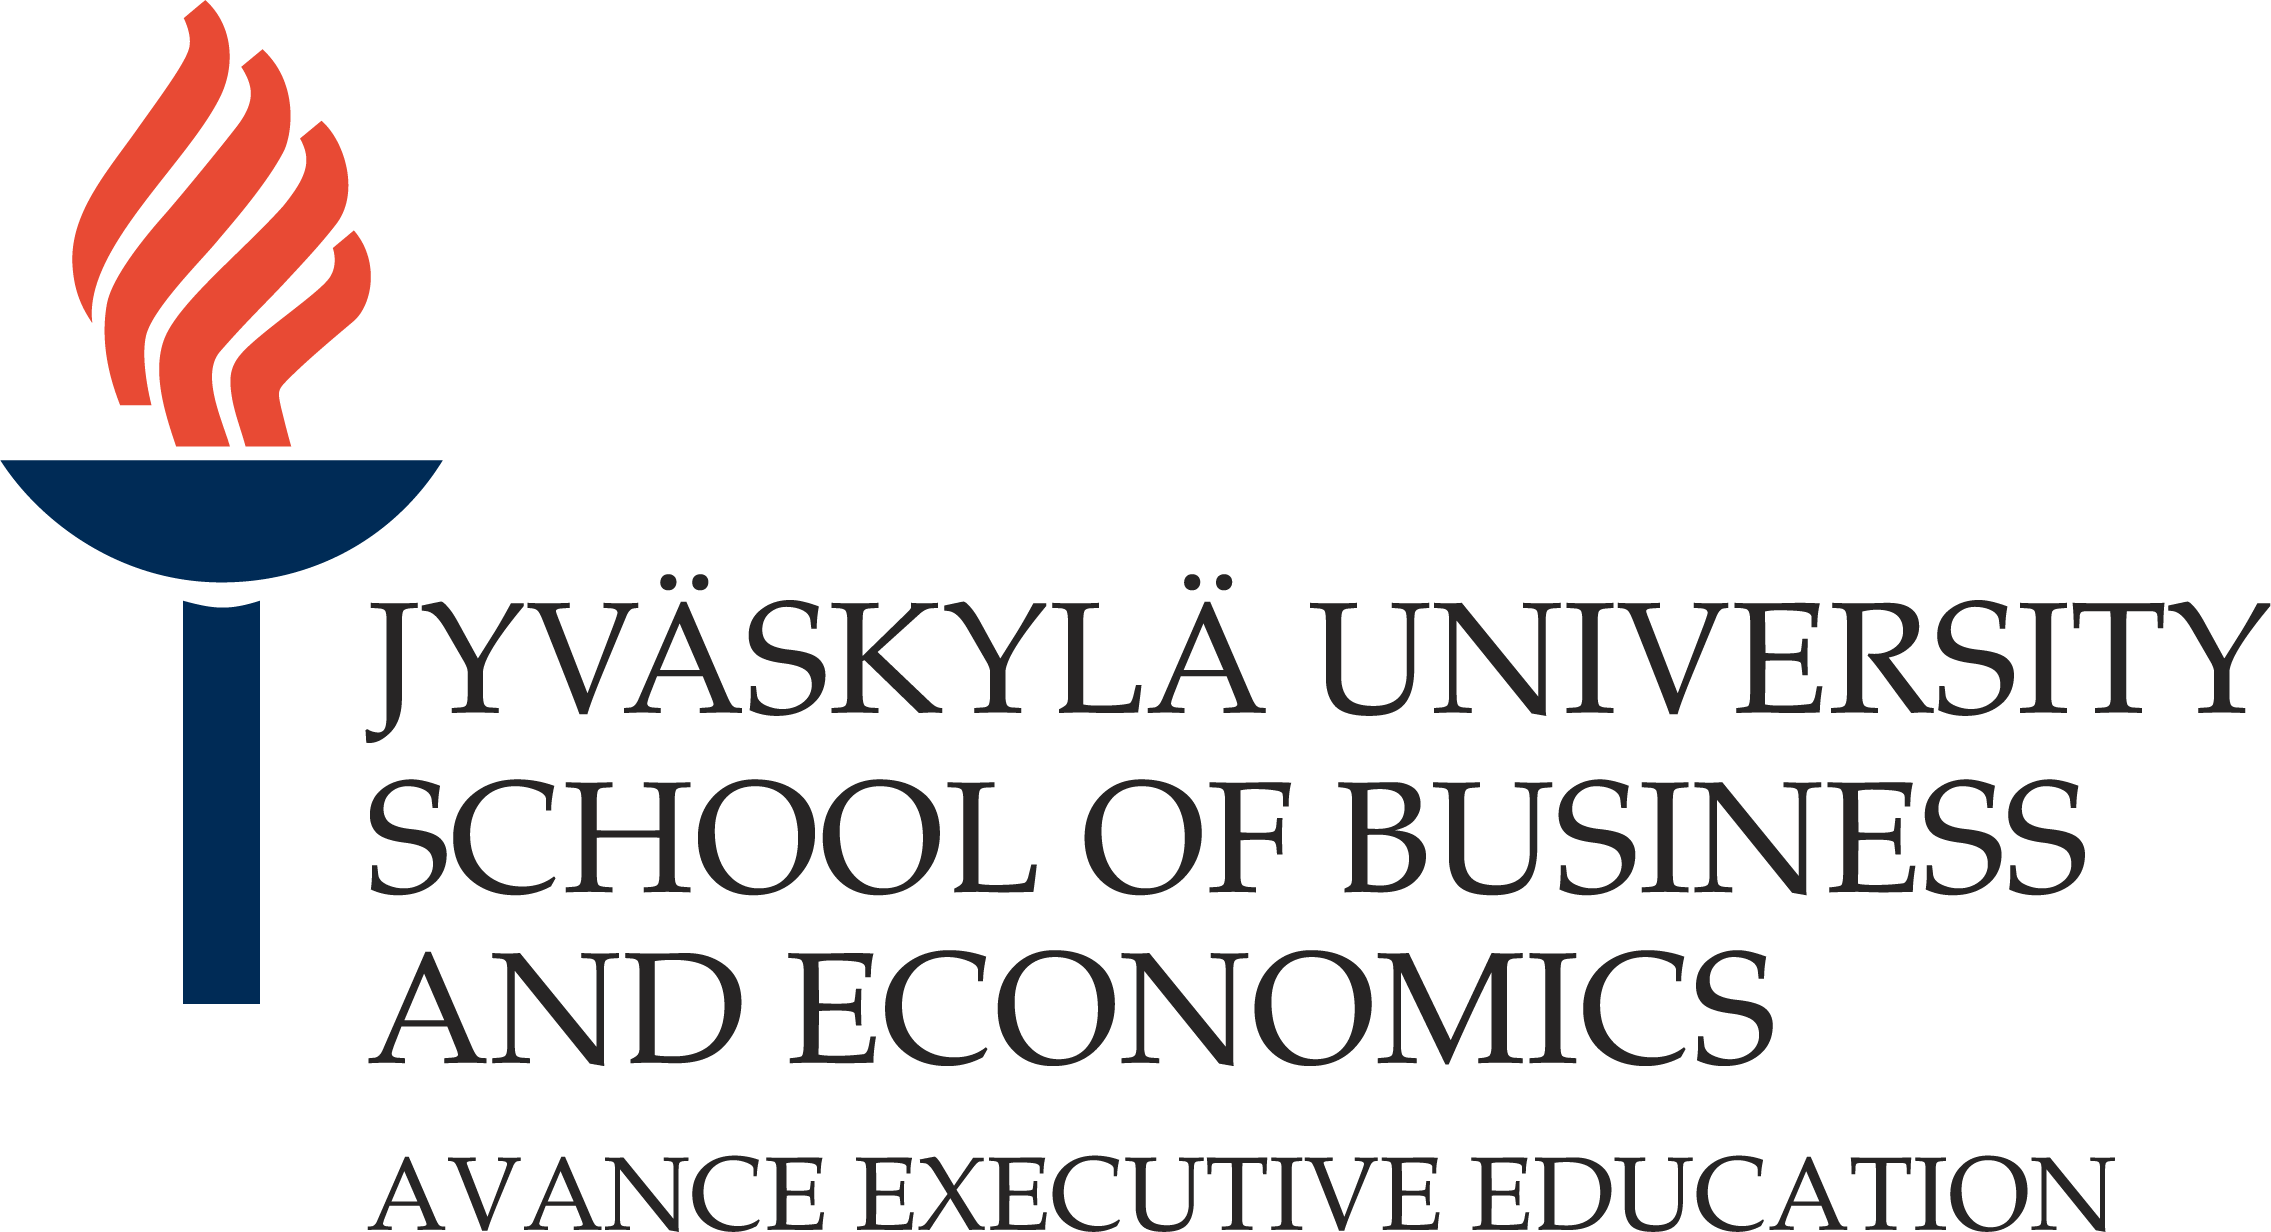 JYU school of business and economics - avance.png